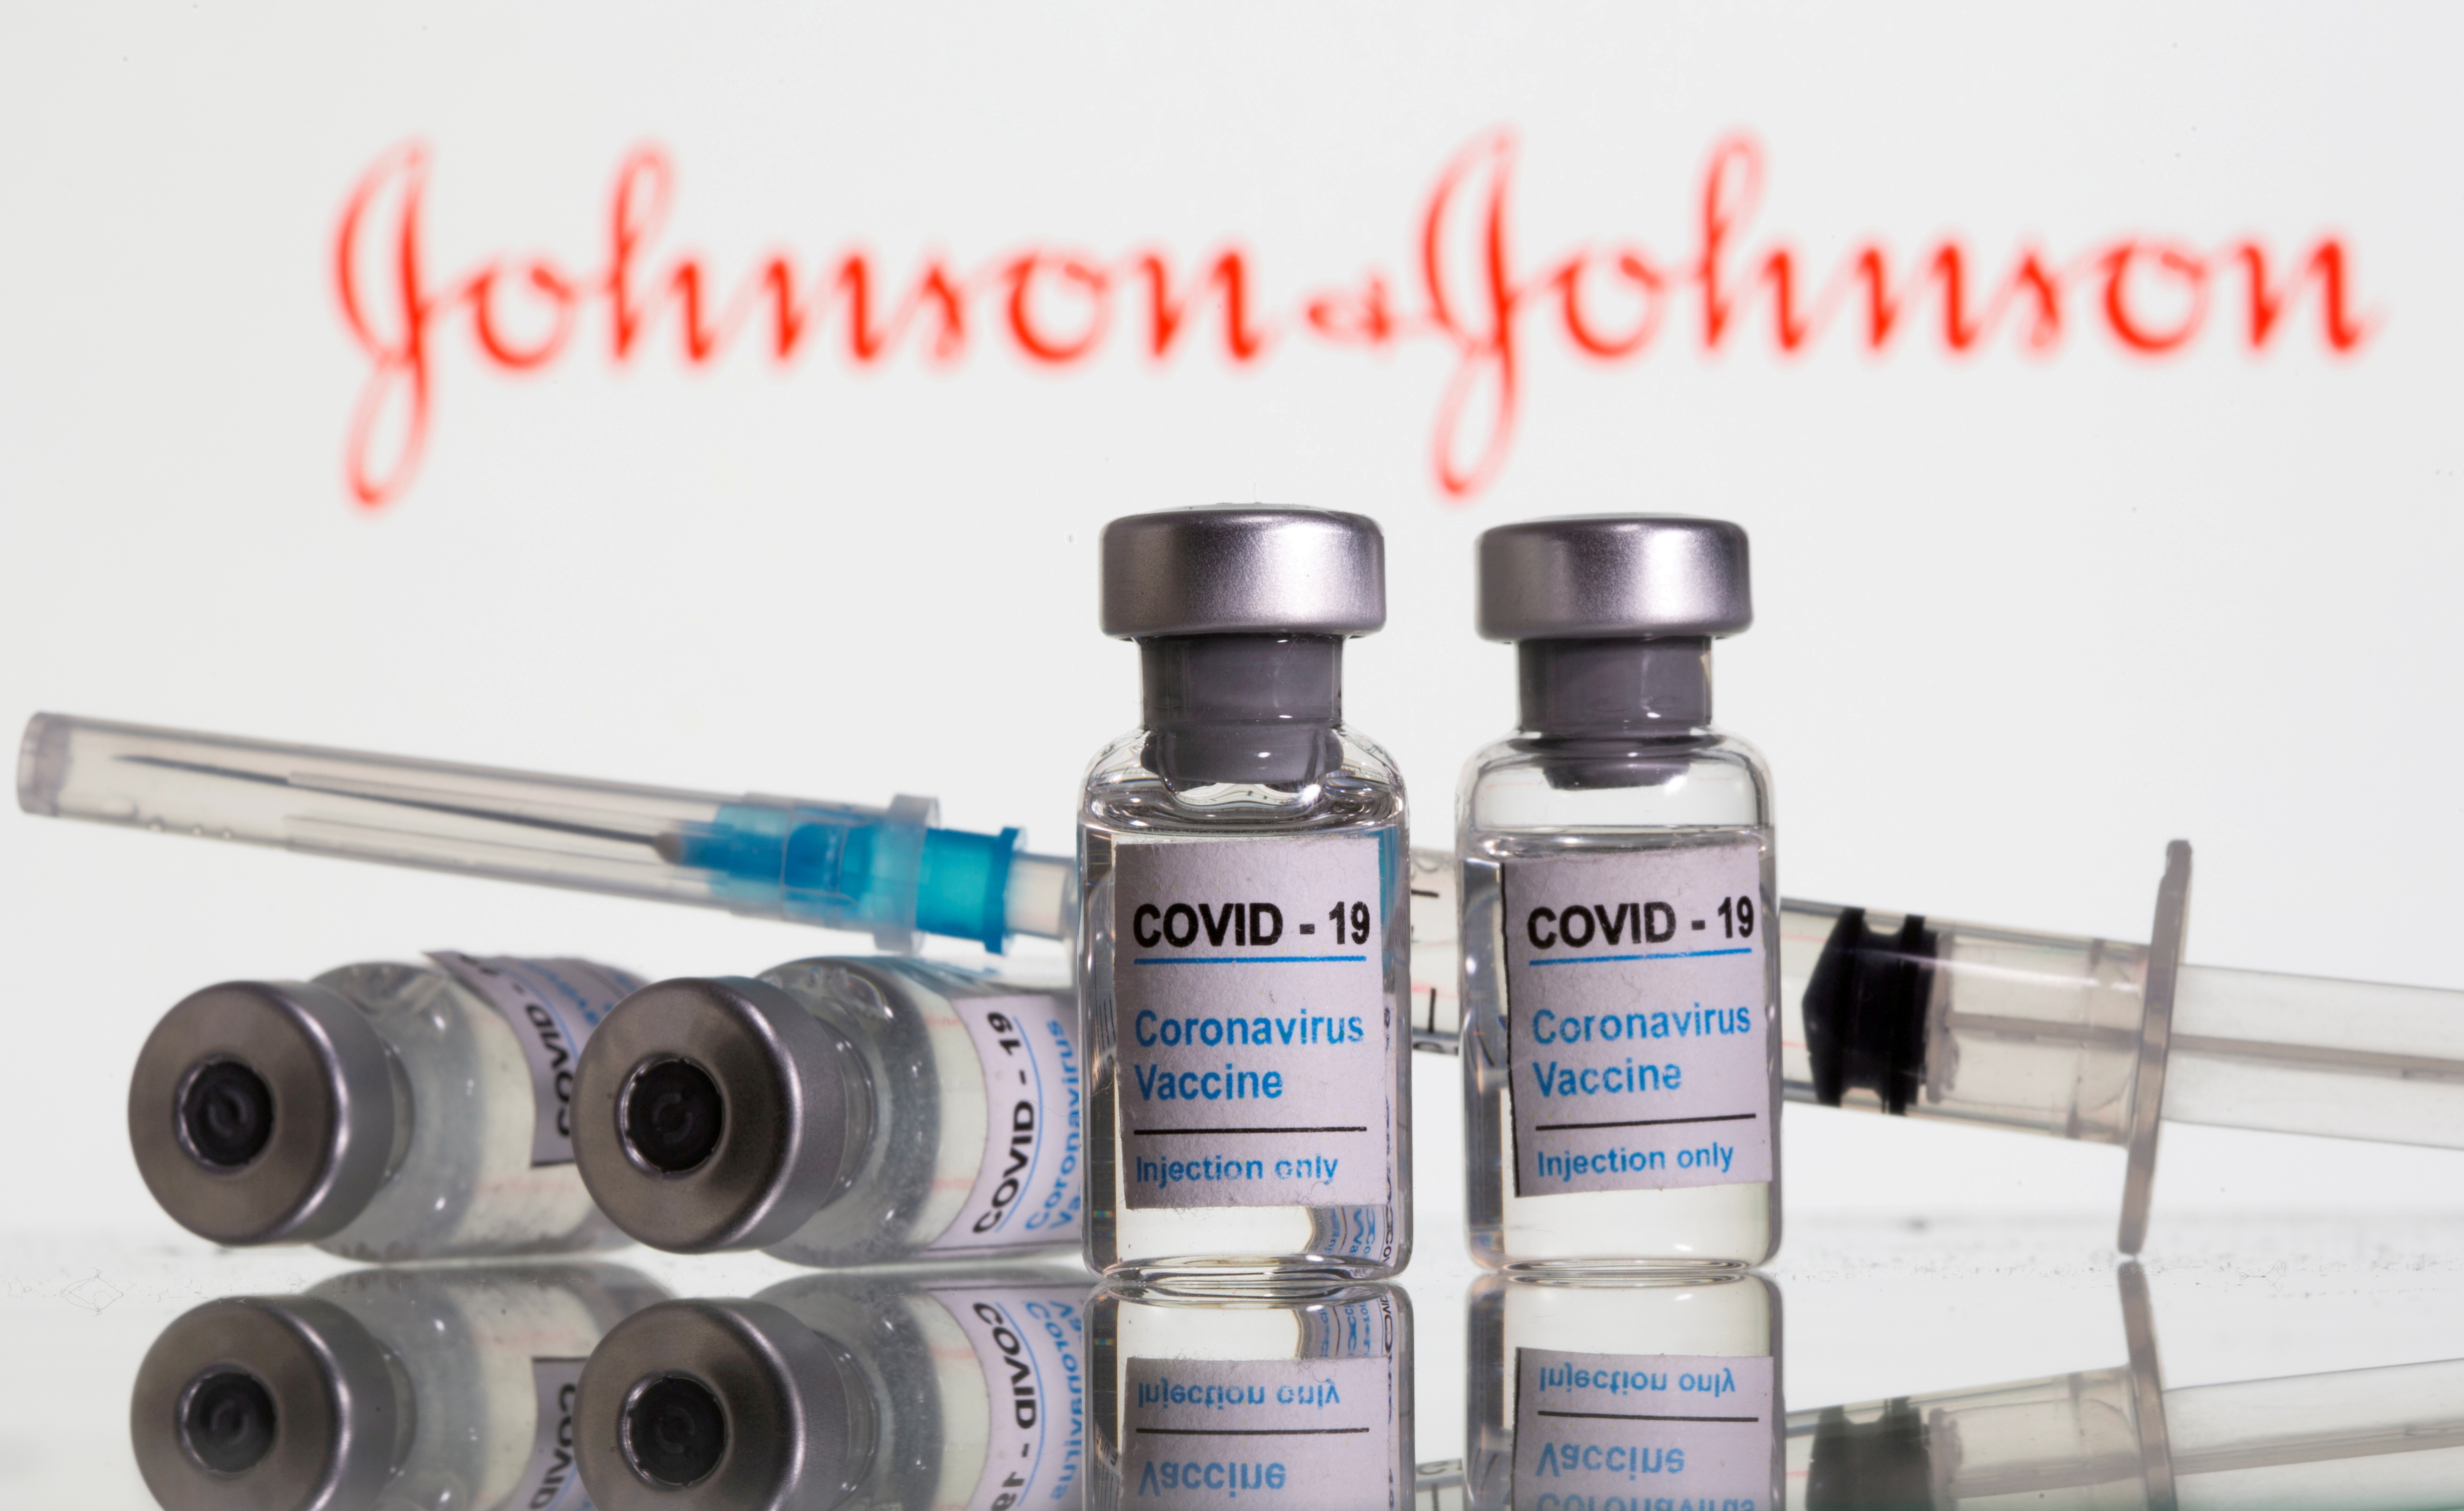 Vials labelled "COVID-19 Coronavirus Vaccine" and sryinge are seen in front of displayed J&J logo in this illustration